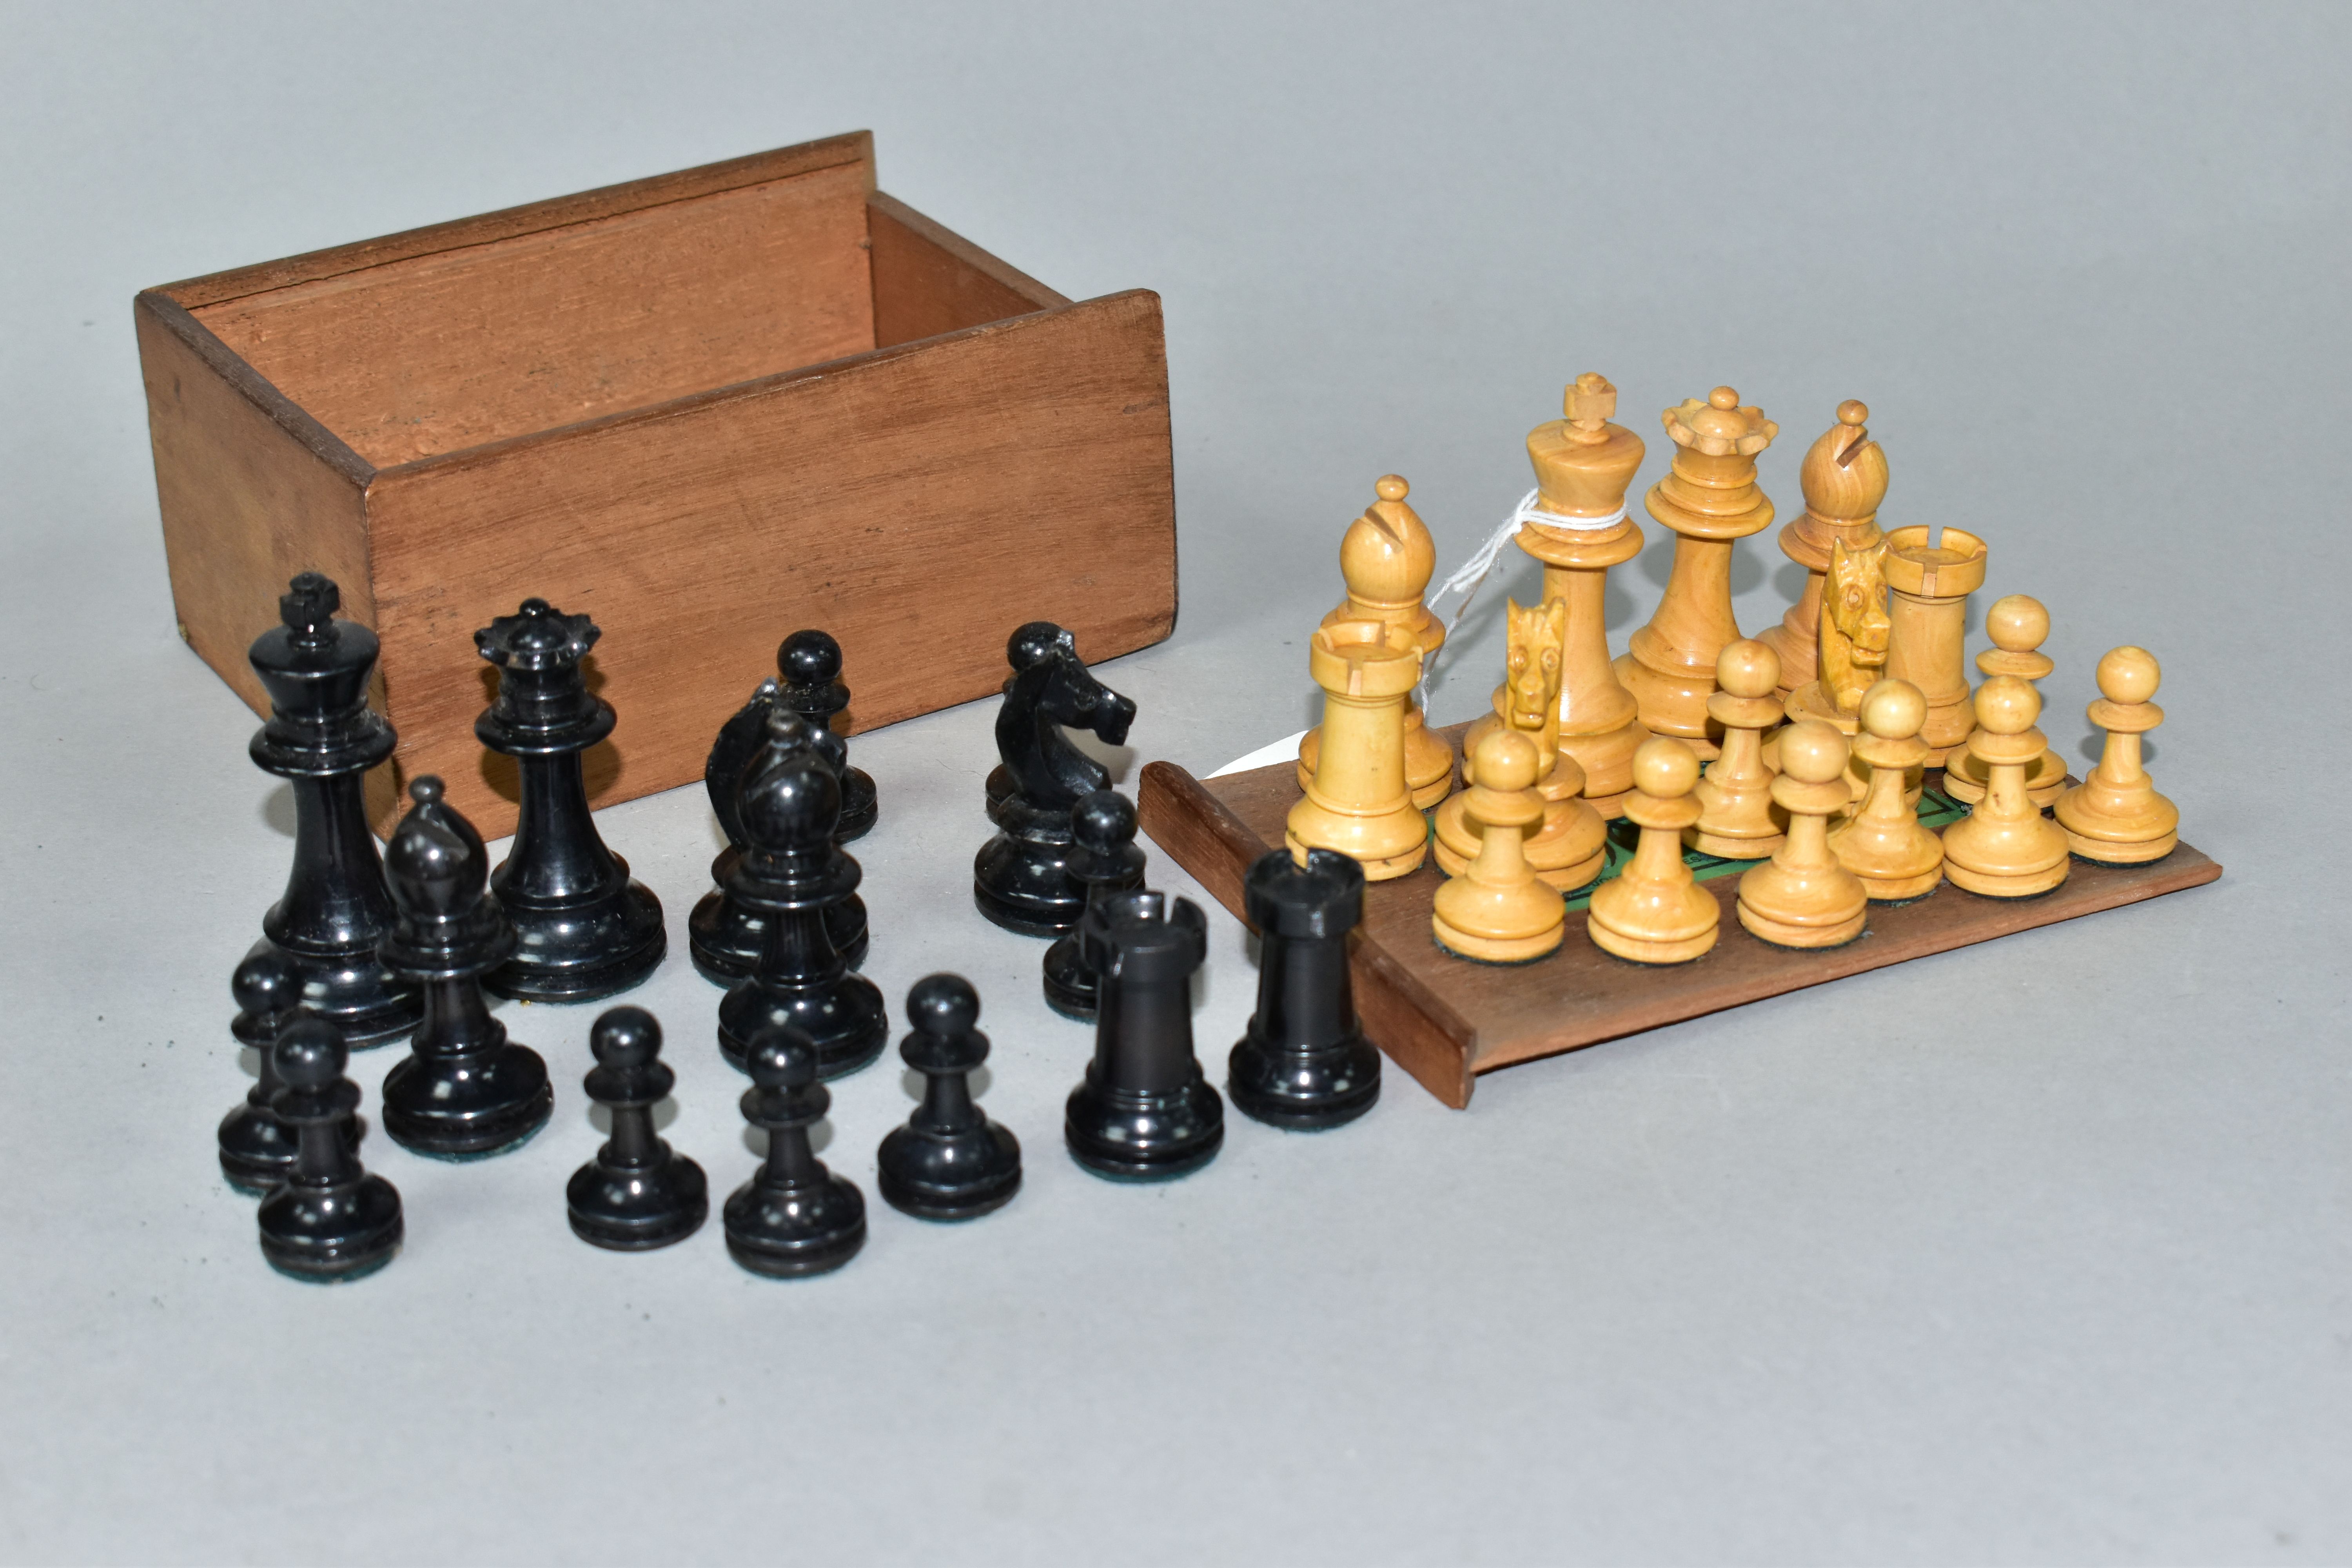 A BOXED WOODEN ORIGINAL CHESS SET, all pieces present, no obvious damage (1)